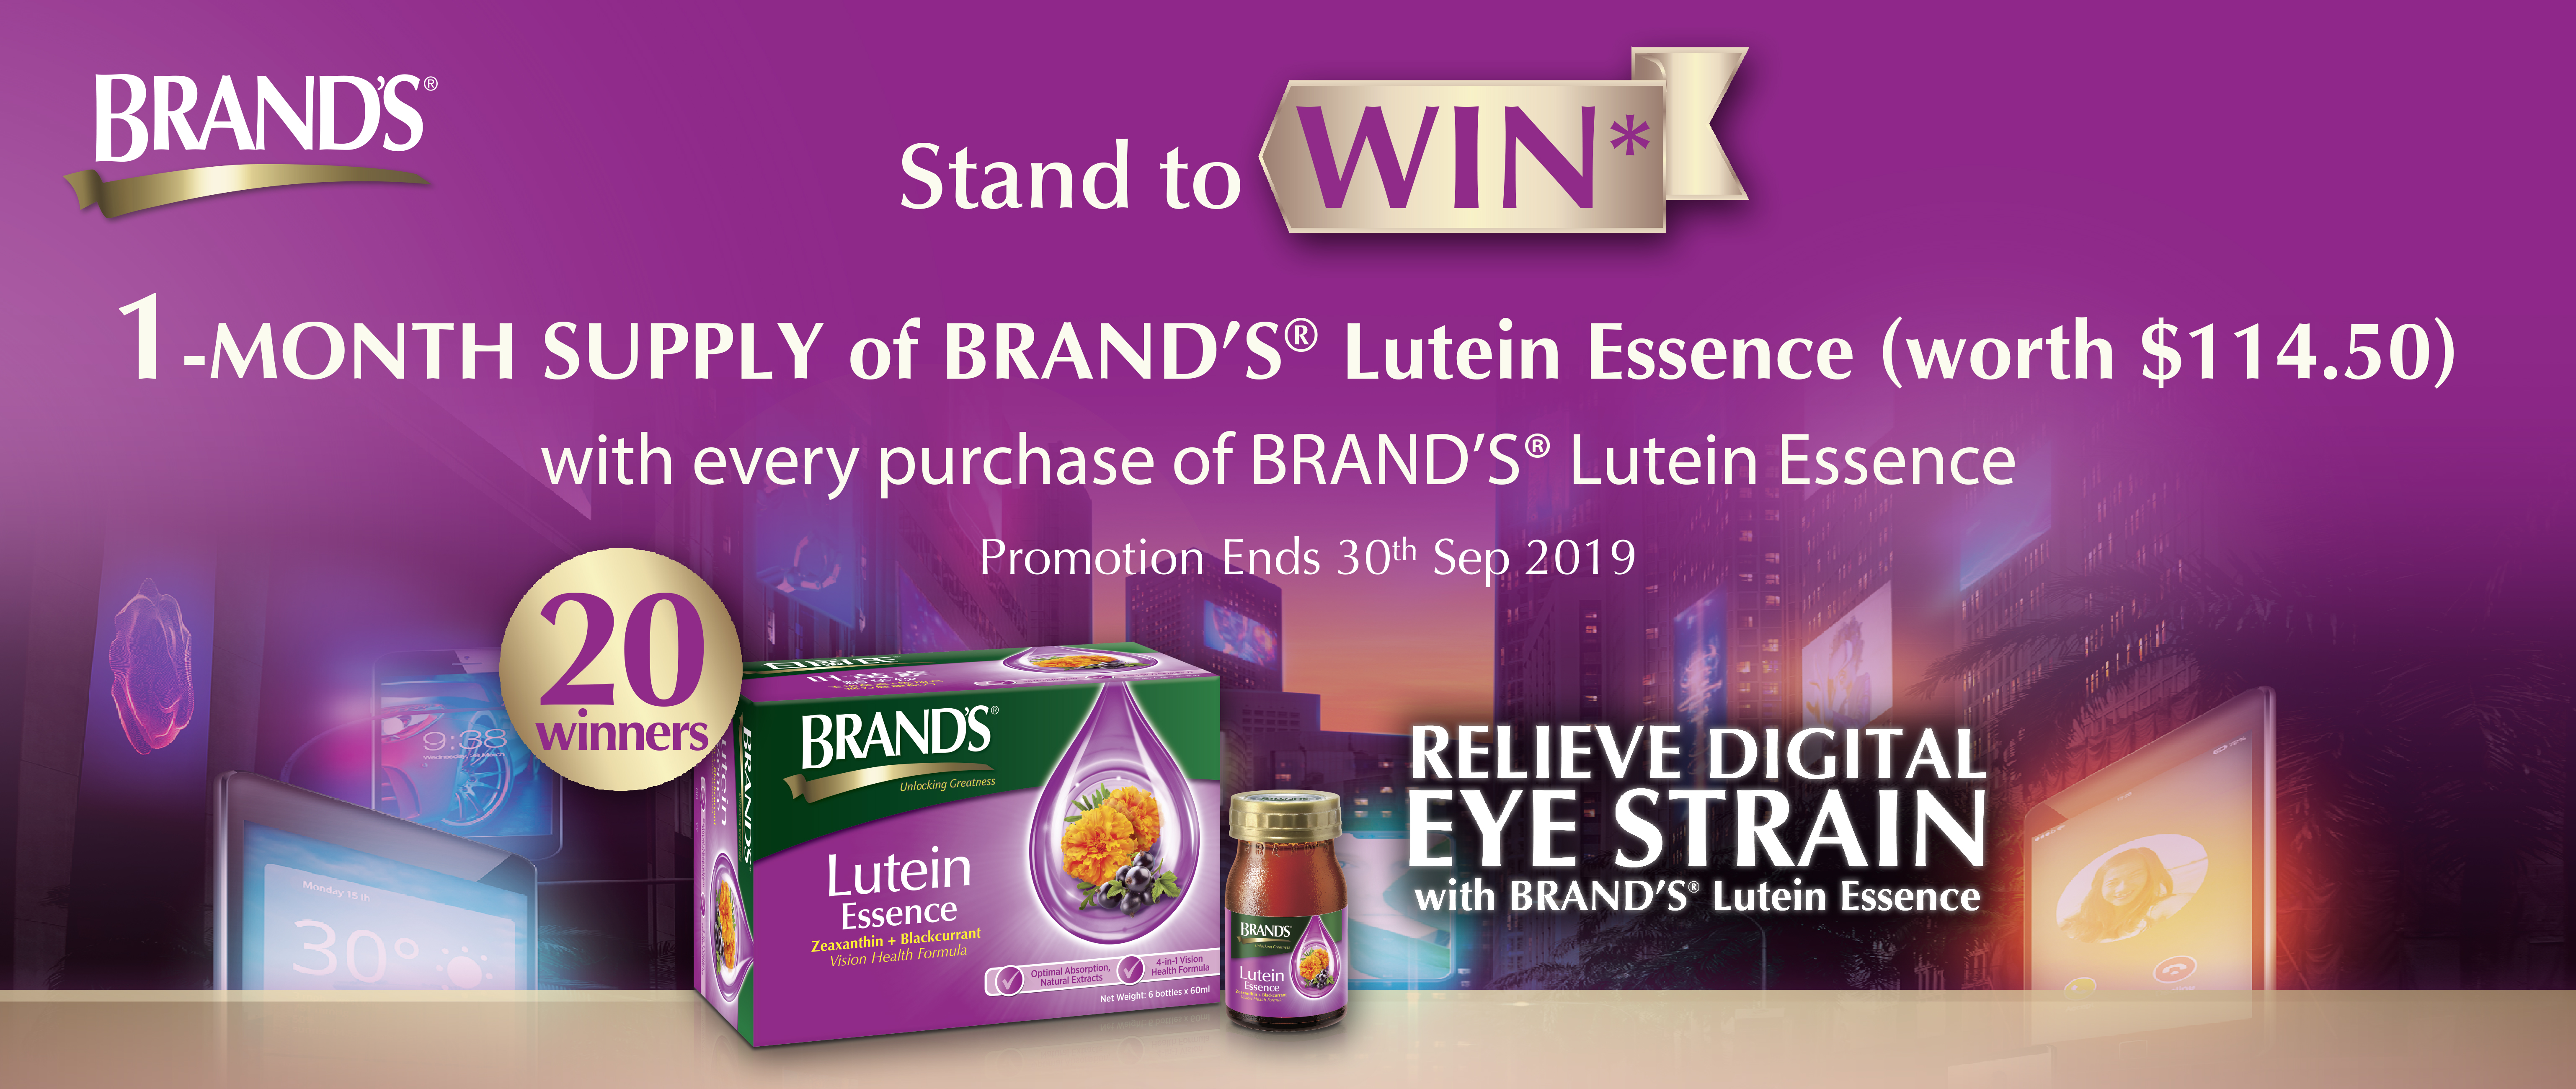 Stand to win BRAND'S® Lutein Essence!